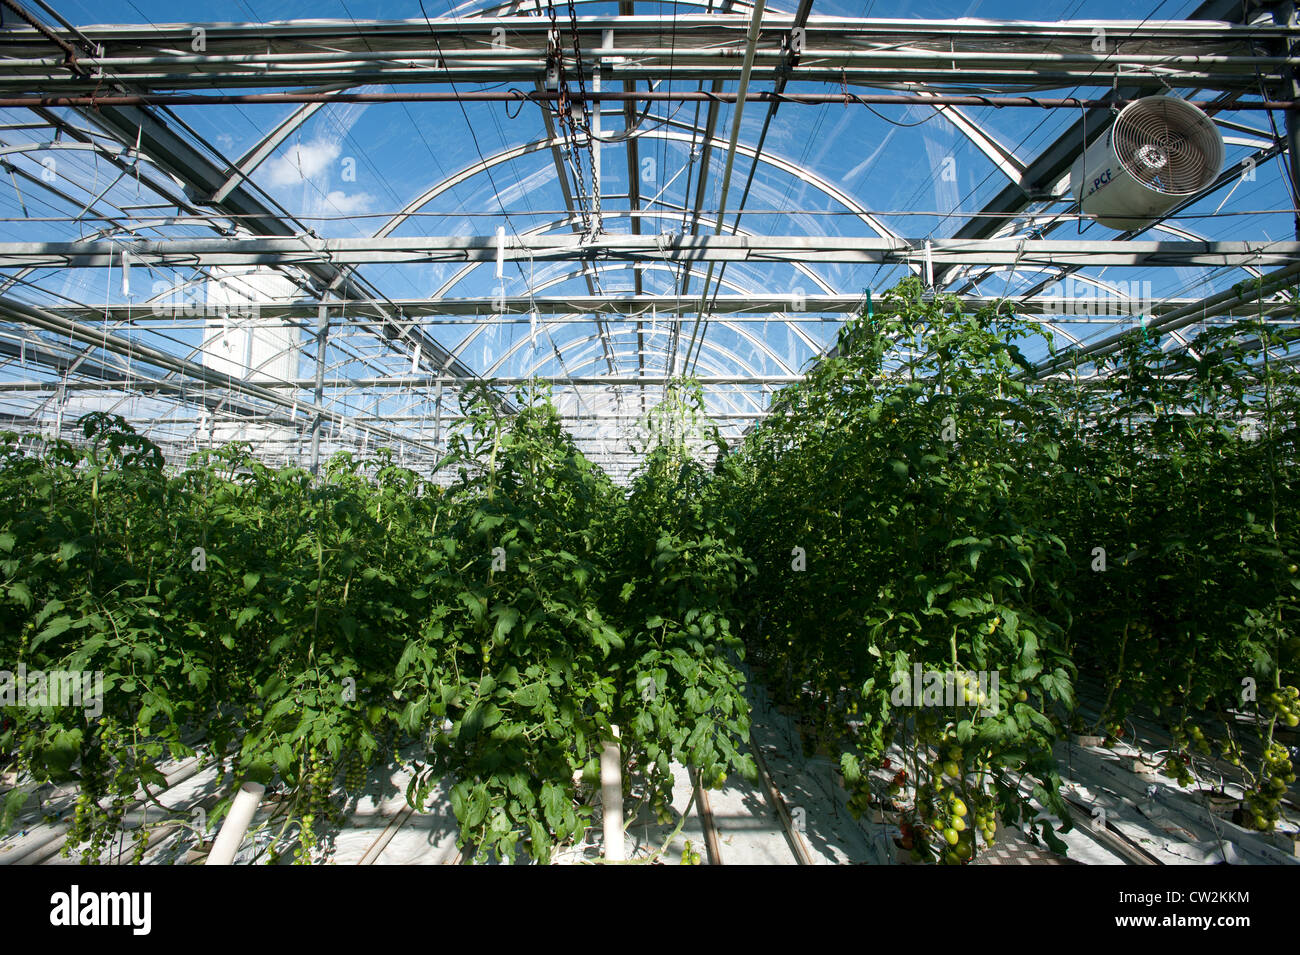 Hydroponically grown tomatoes Stock Photo